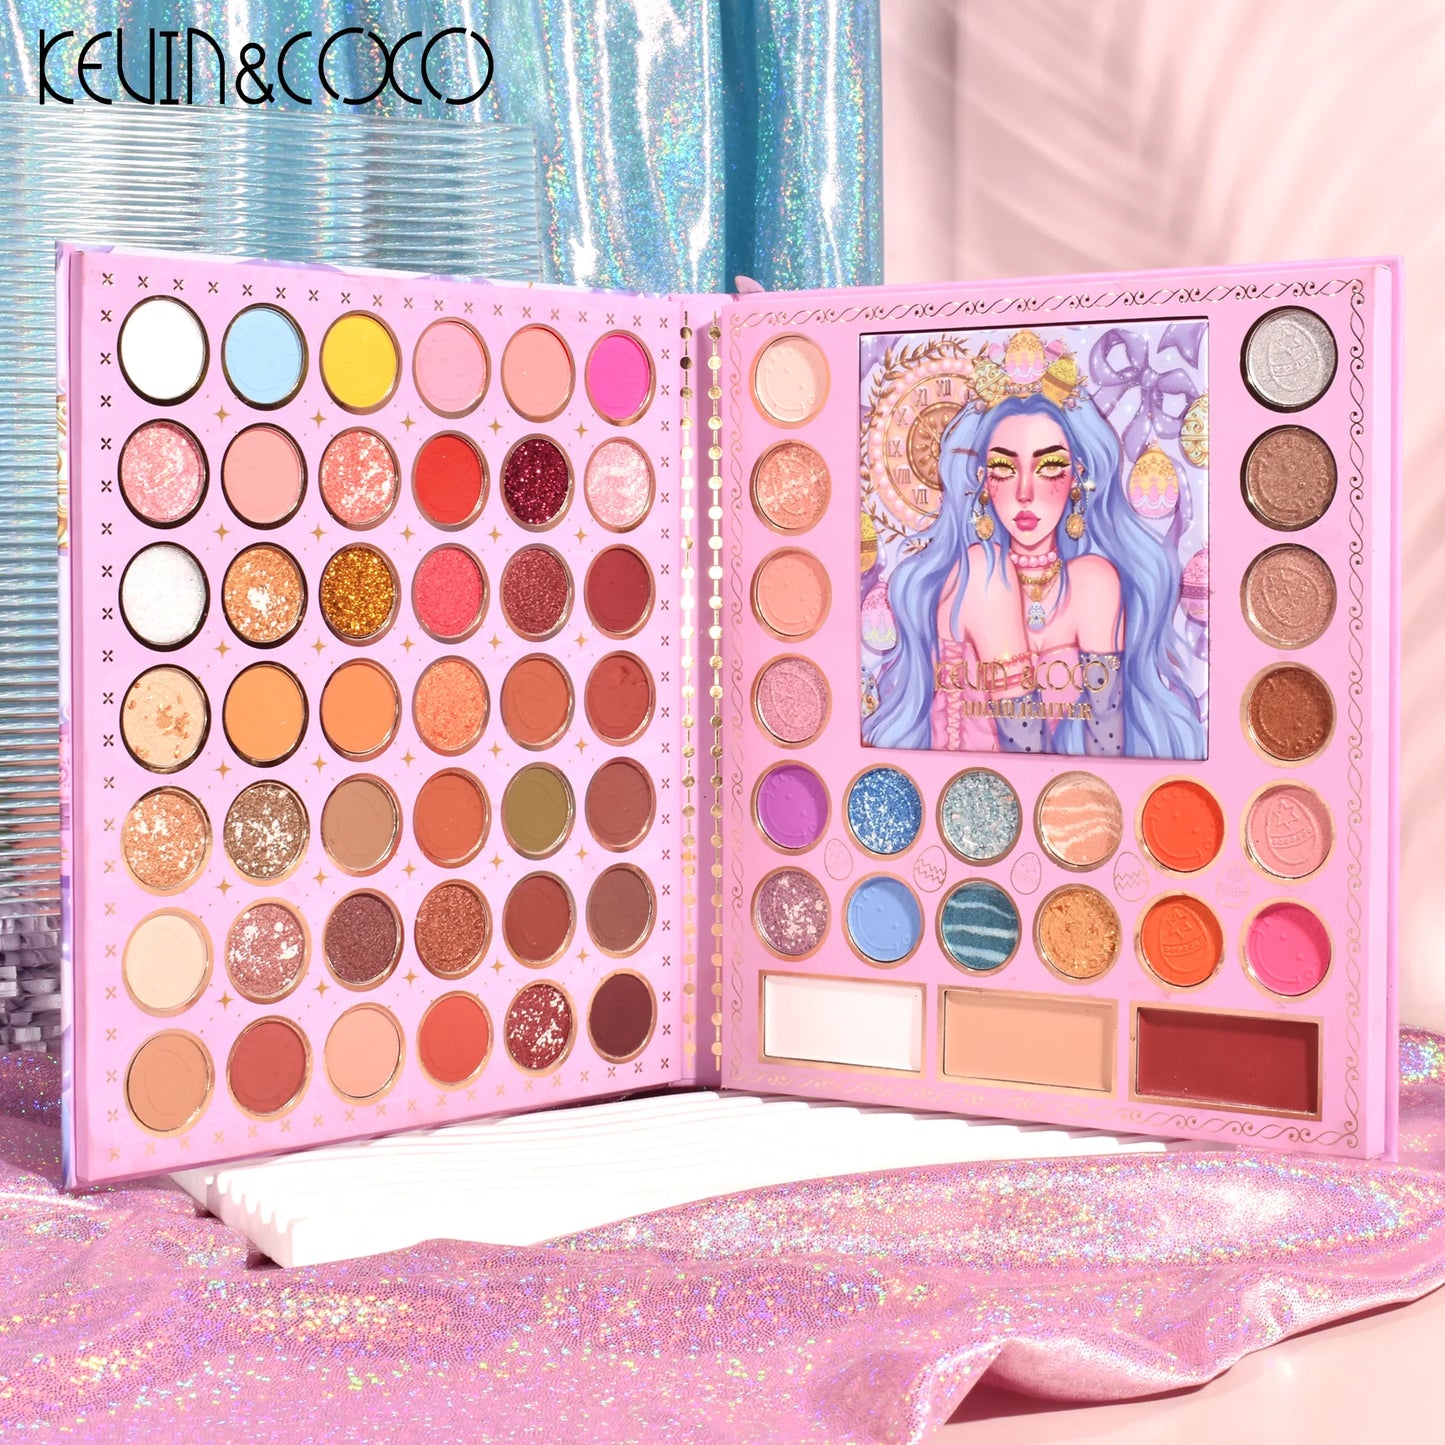 KEVIN&COCO EASTER EGGS 69 COLOR EYESHADOW / FACE PALETTE KC223588 R132